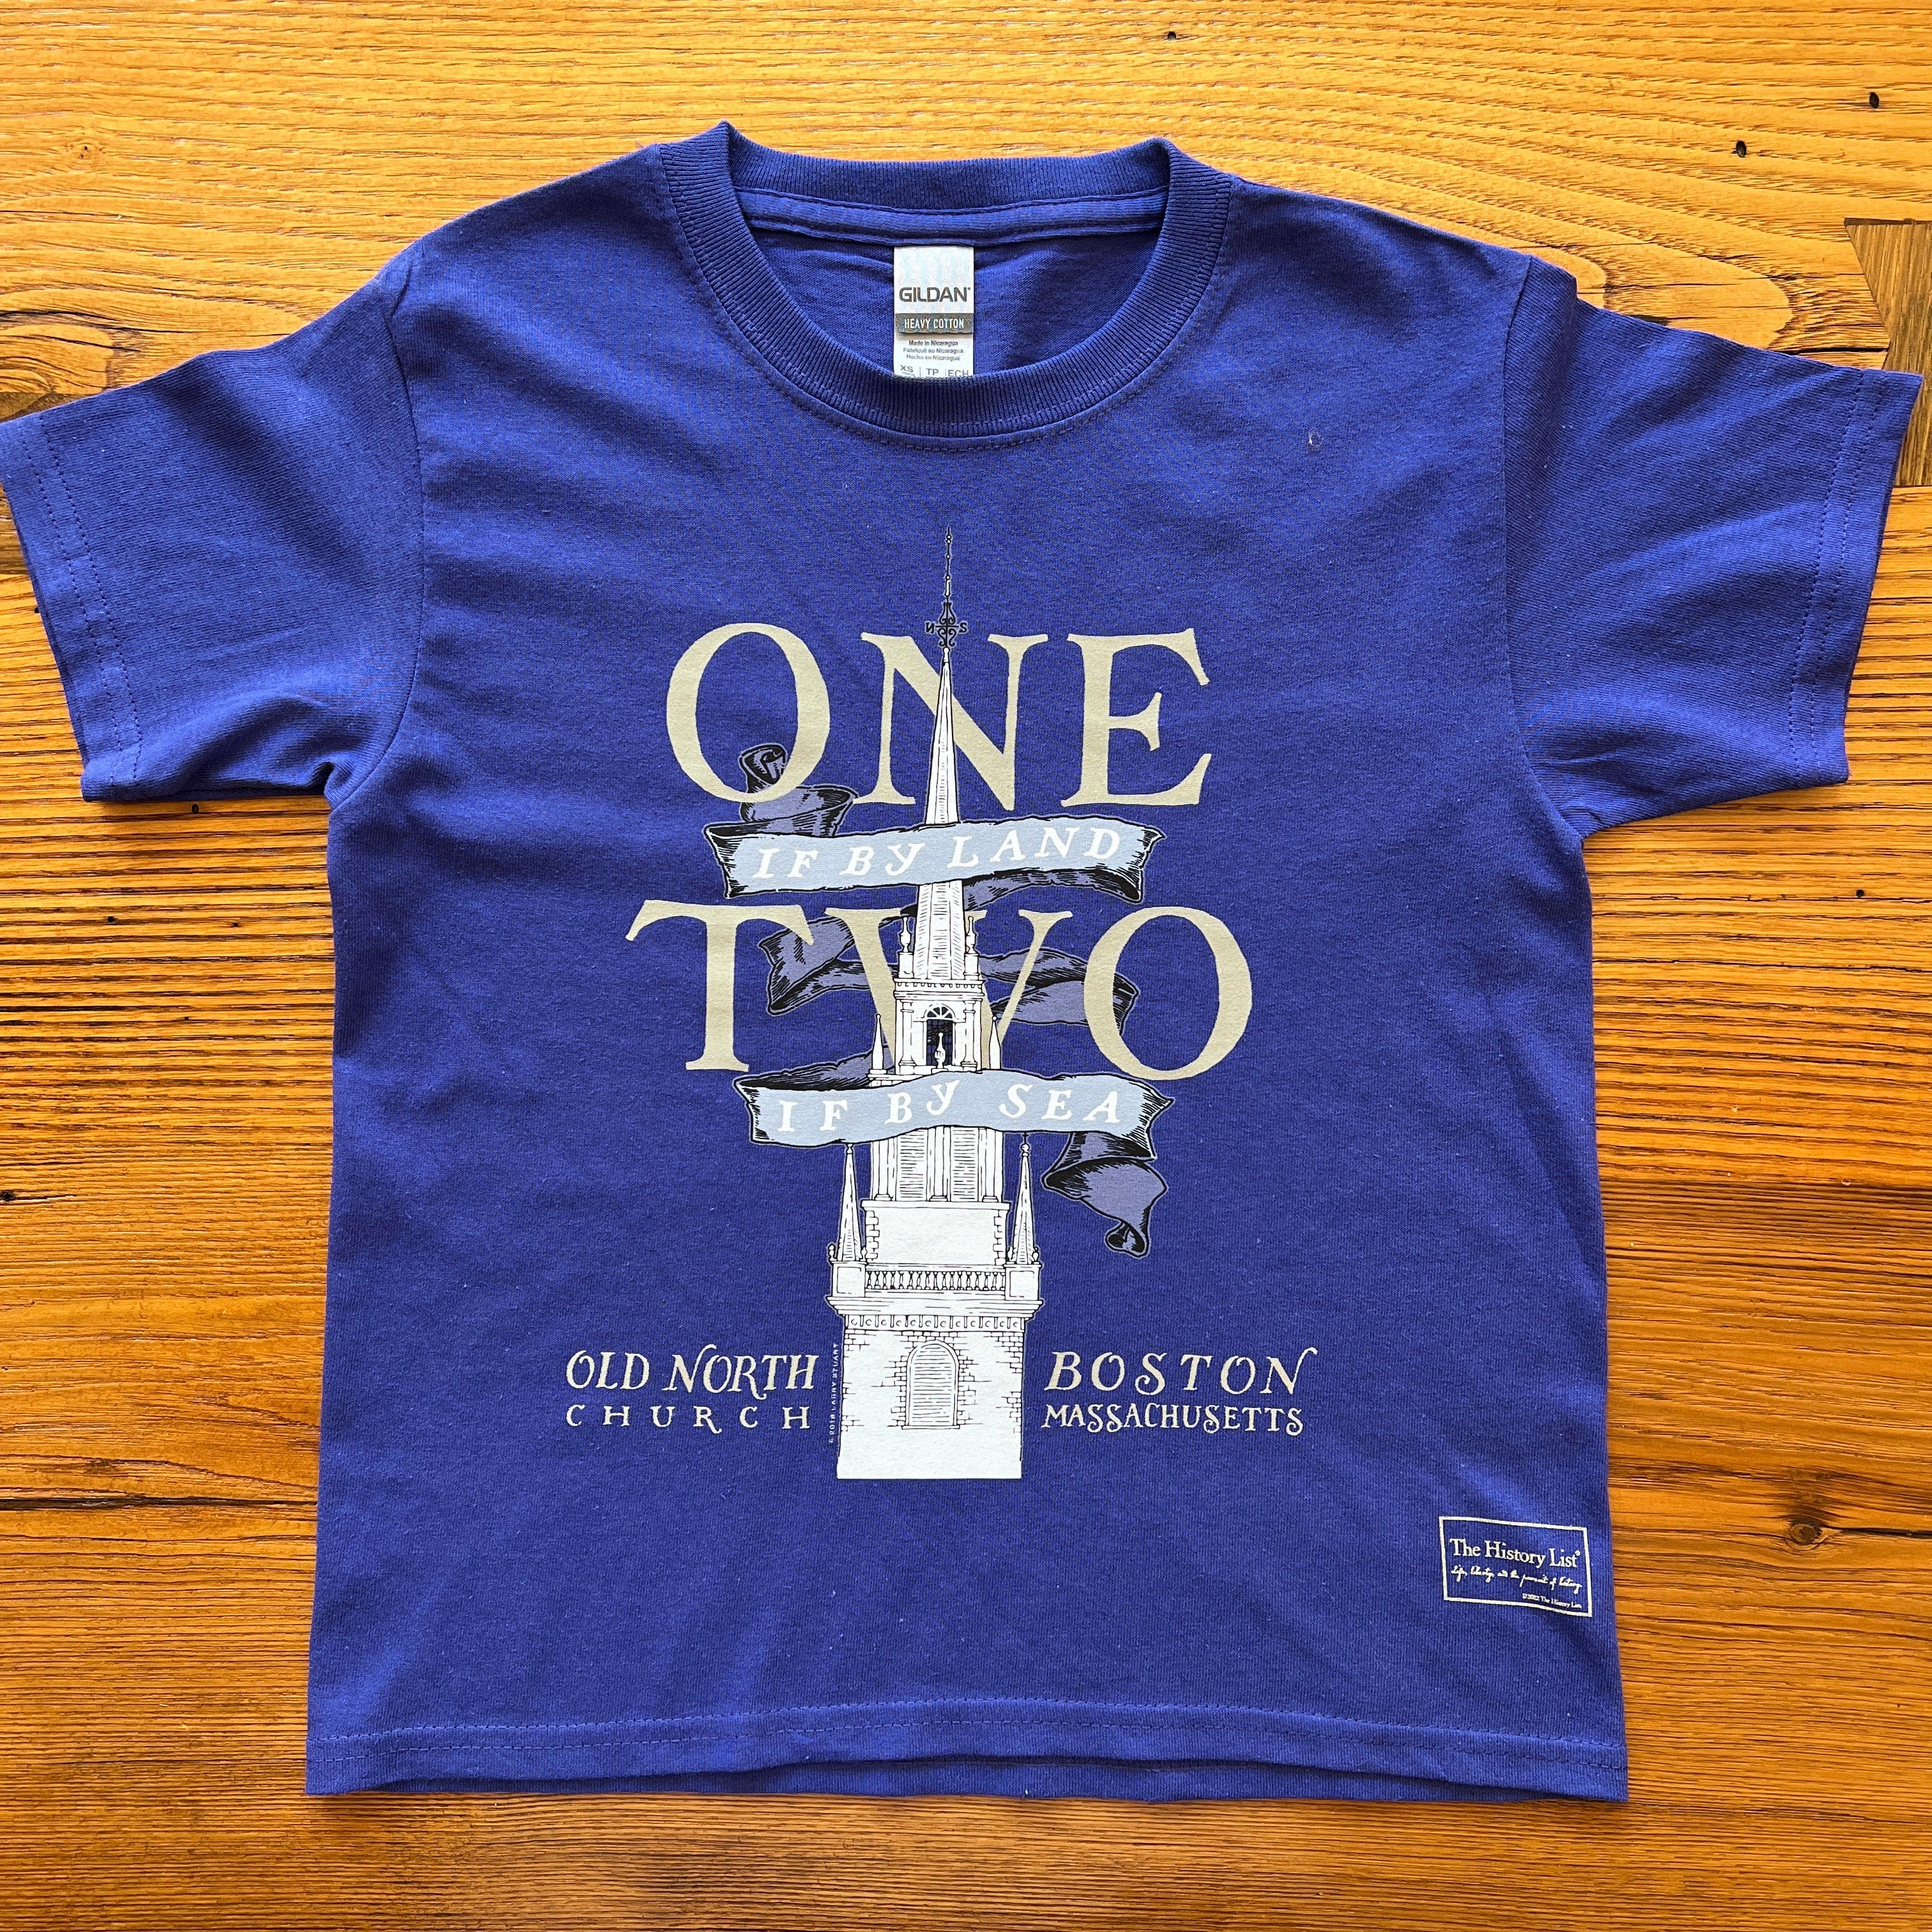 One if by land" shirt celebrating the midnight ride of Paul Revere in – History List